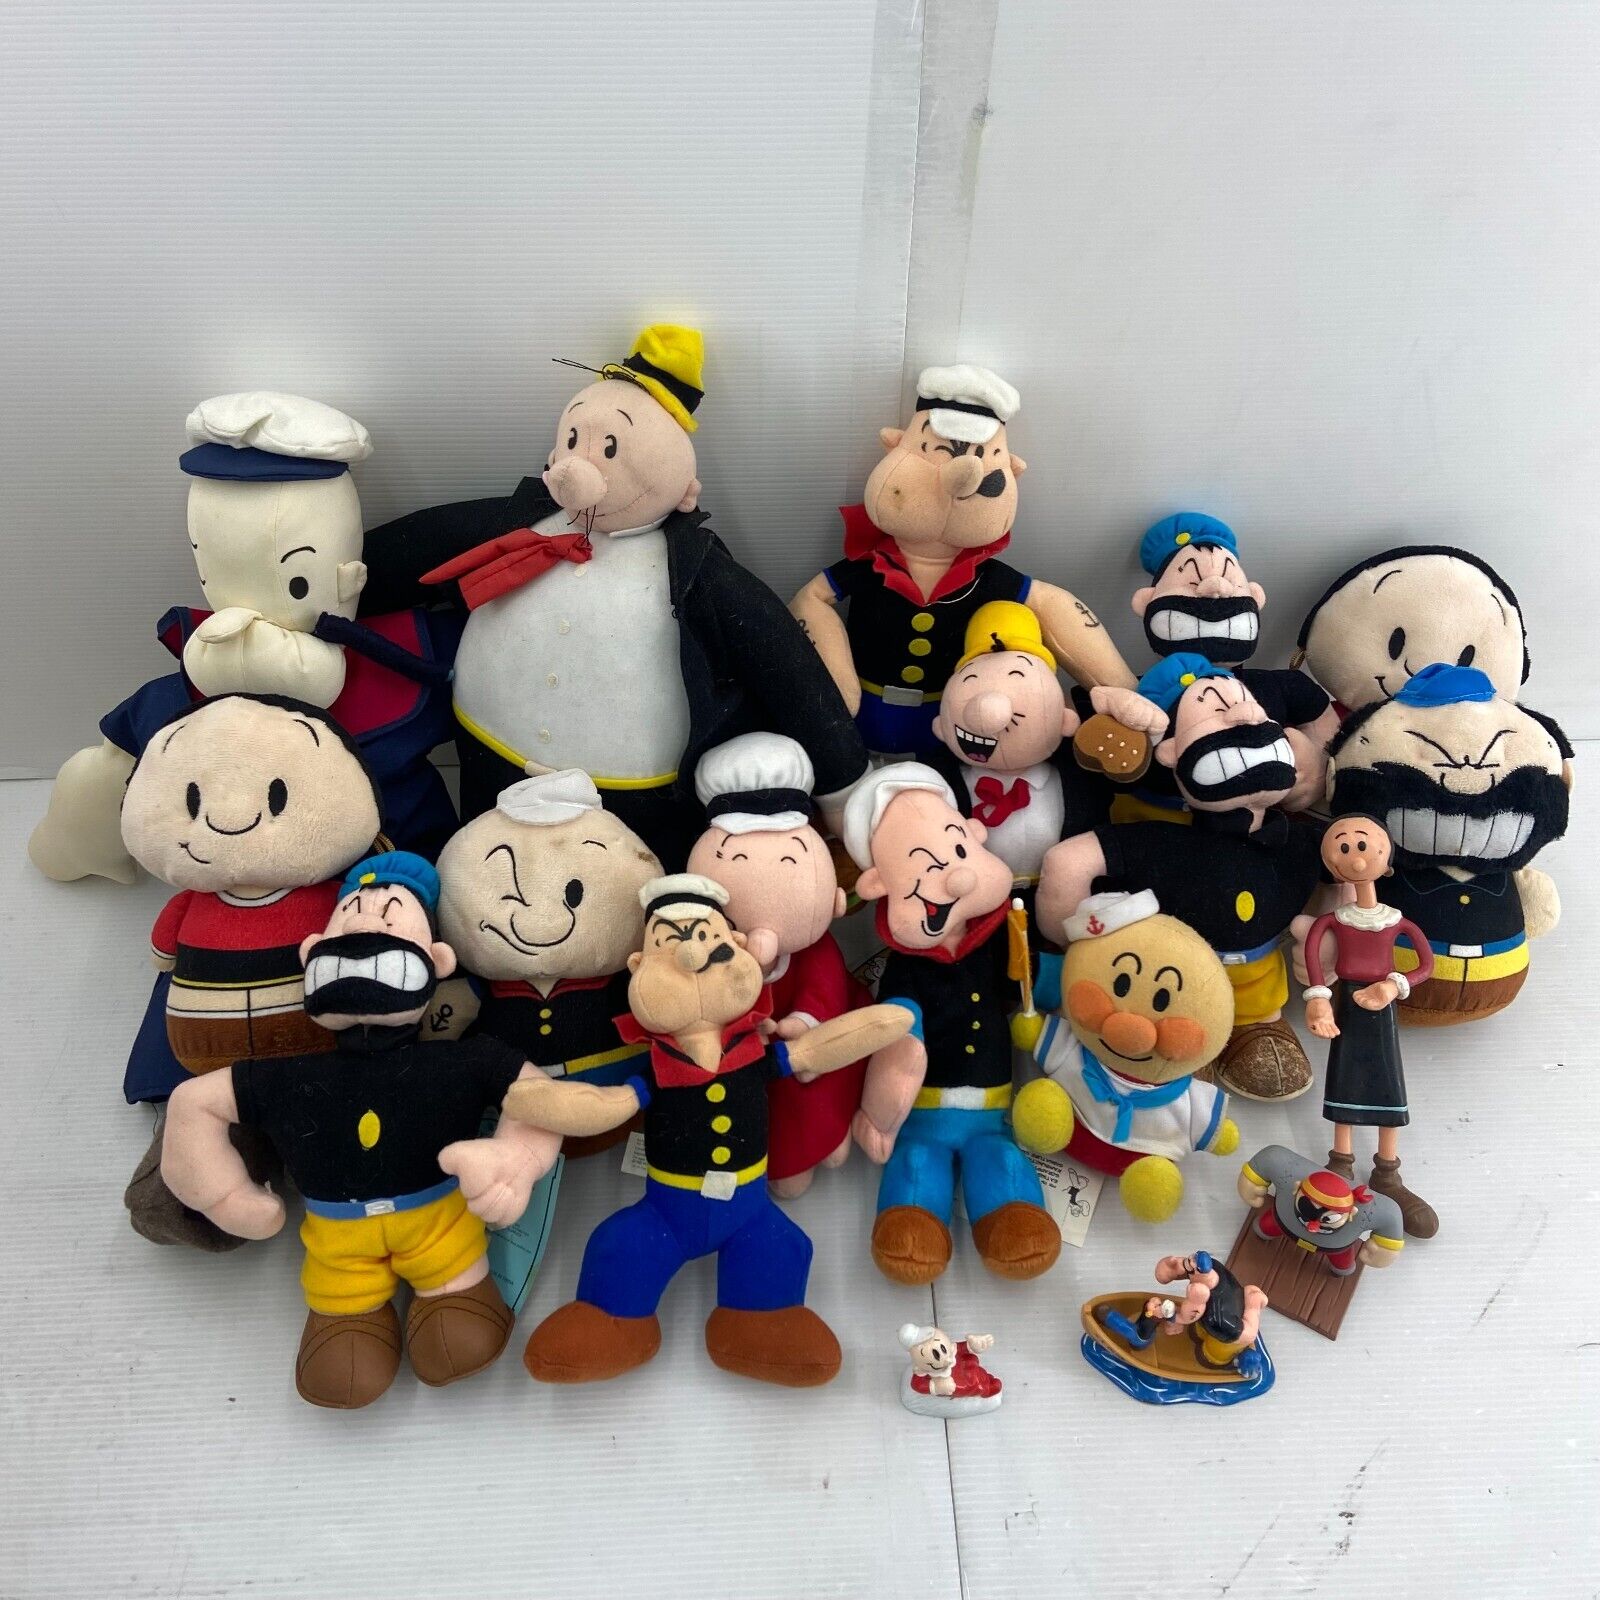 Mixed LOT 19 Stuffins Popeye the Sailor Plush Toy Doll Figures Olive Oyl Bluto